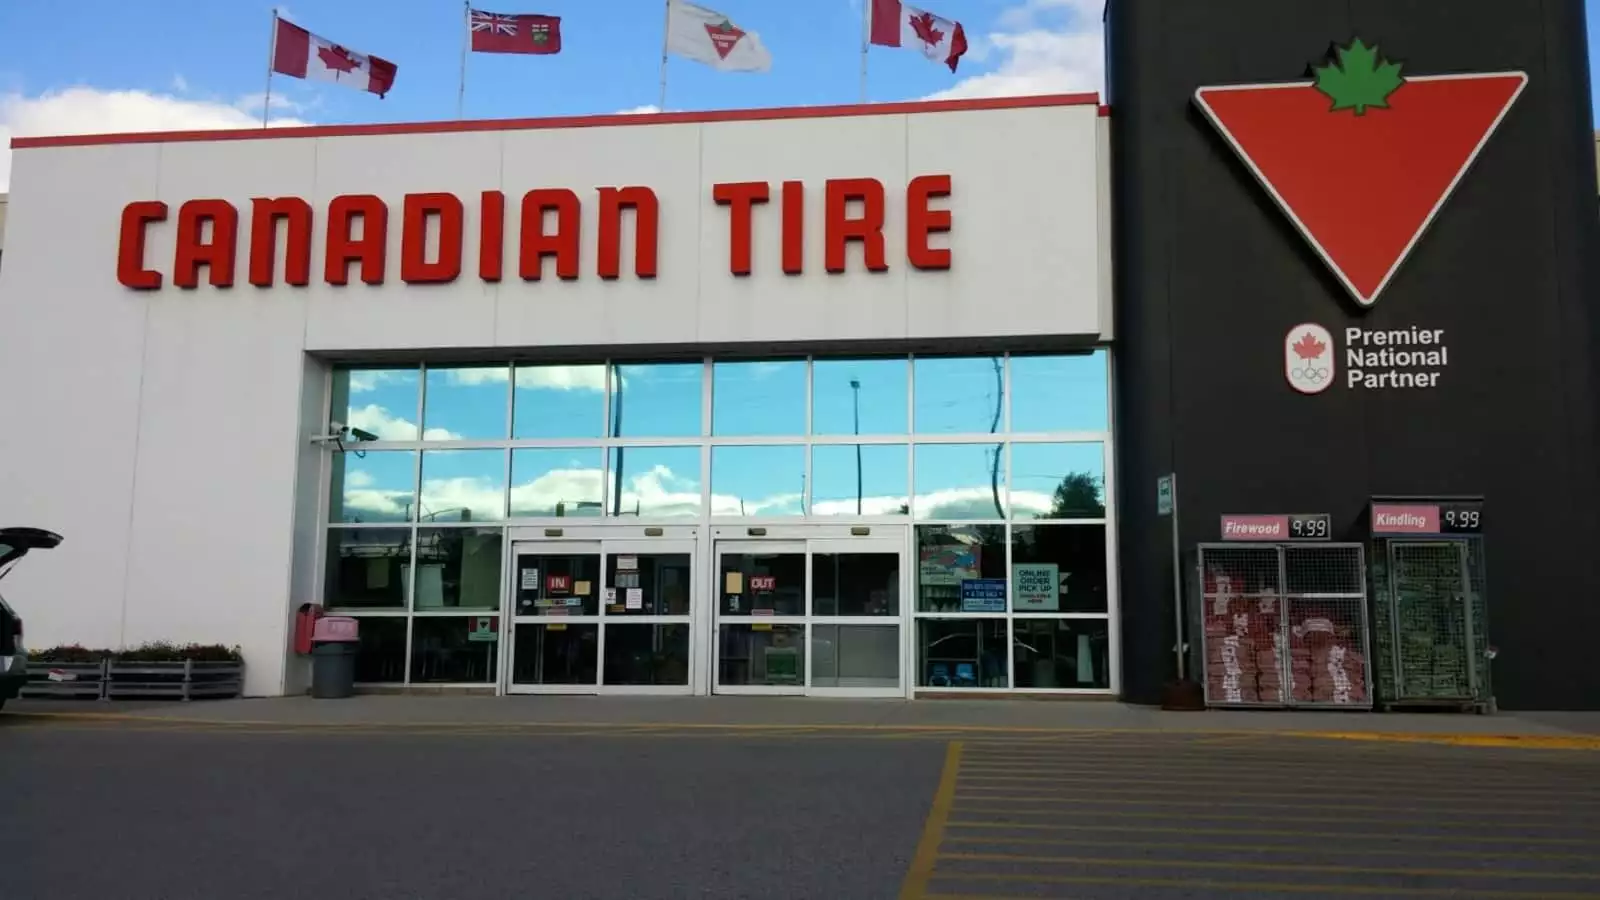 What Street Was the First Canadian Tire?